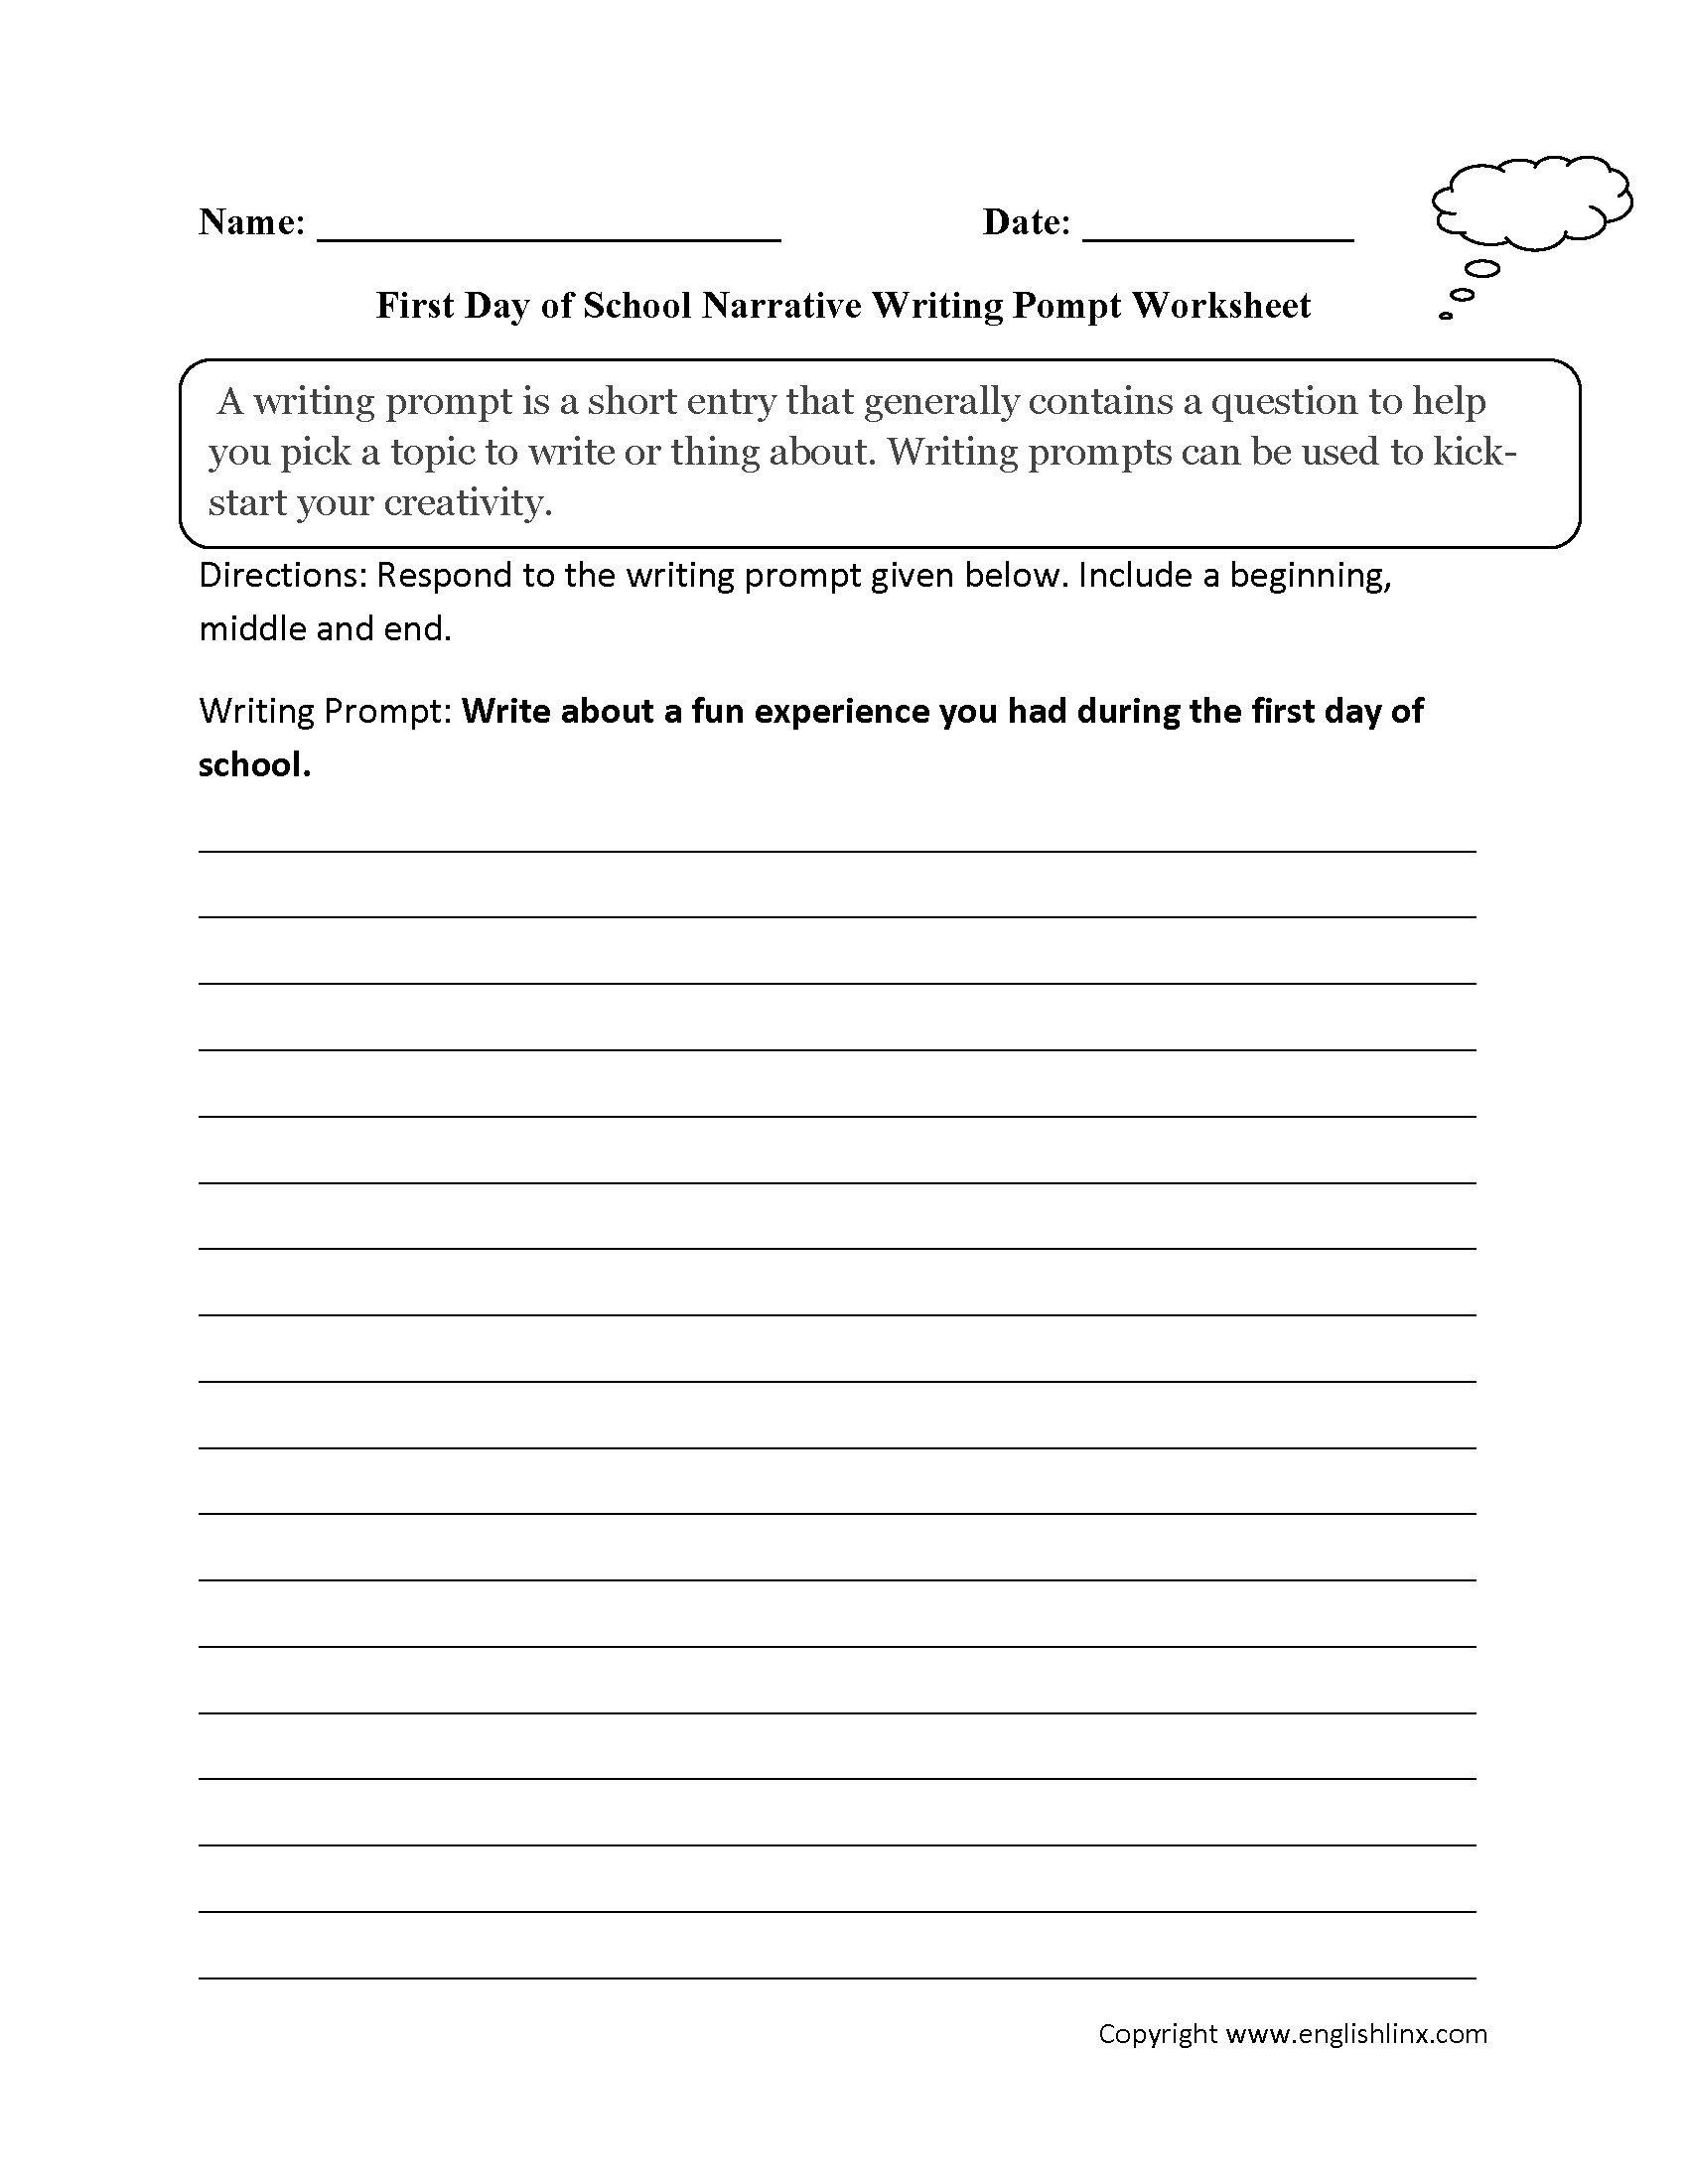 First Day of School Narrative Writing Prompt Worksheet